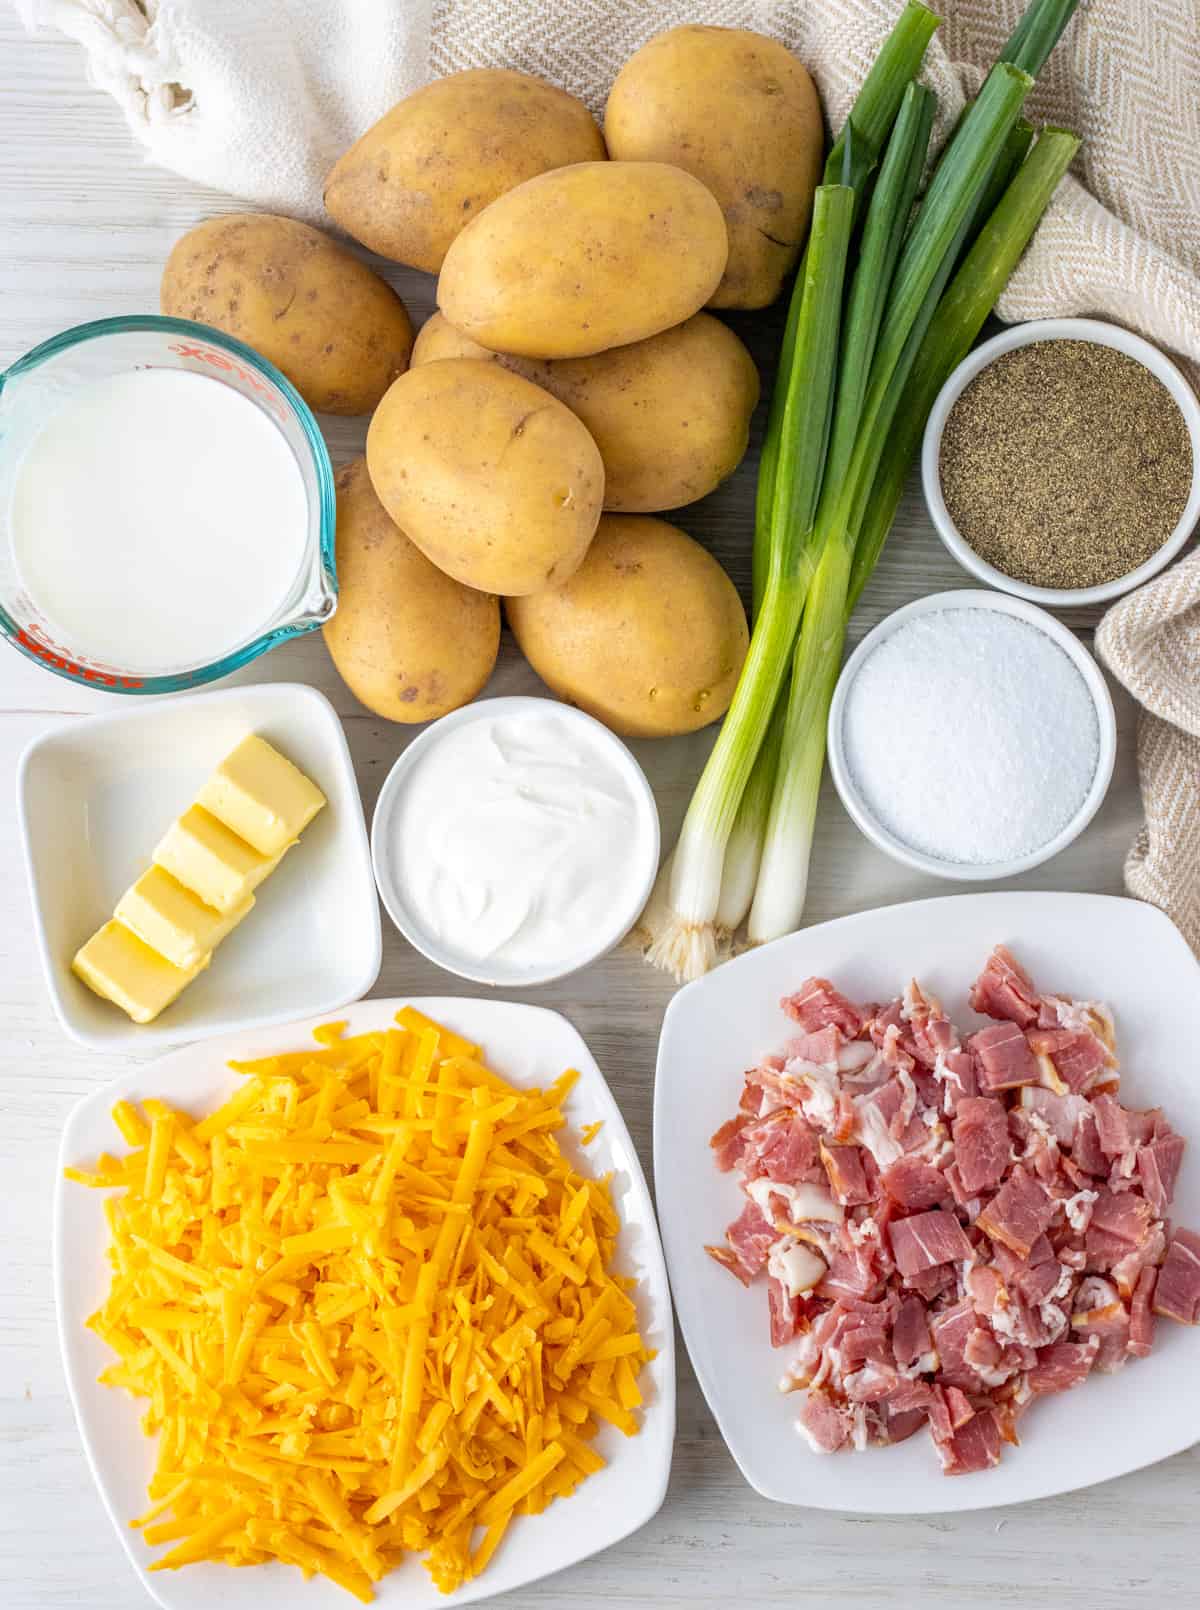 Ingredients for twice baked mashed potatoes.